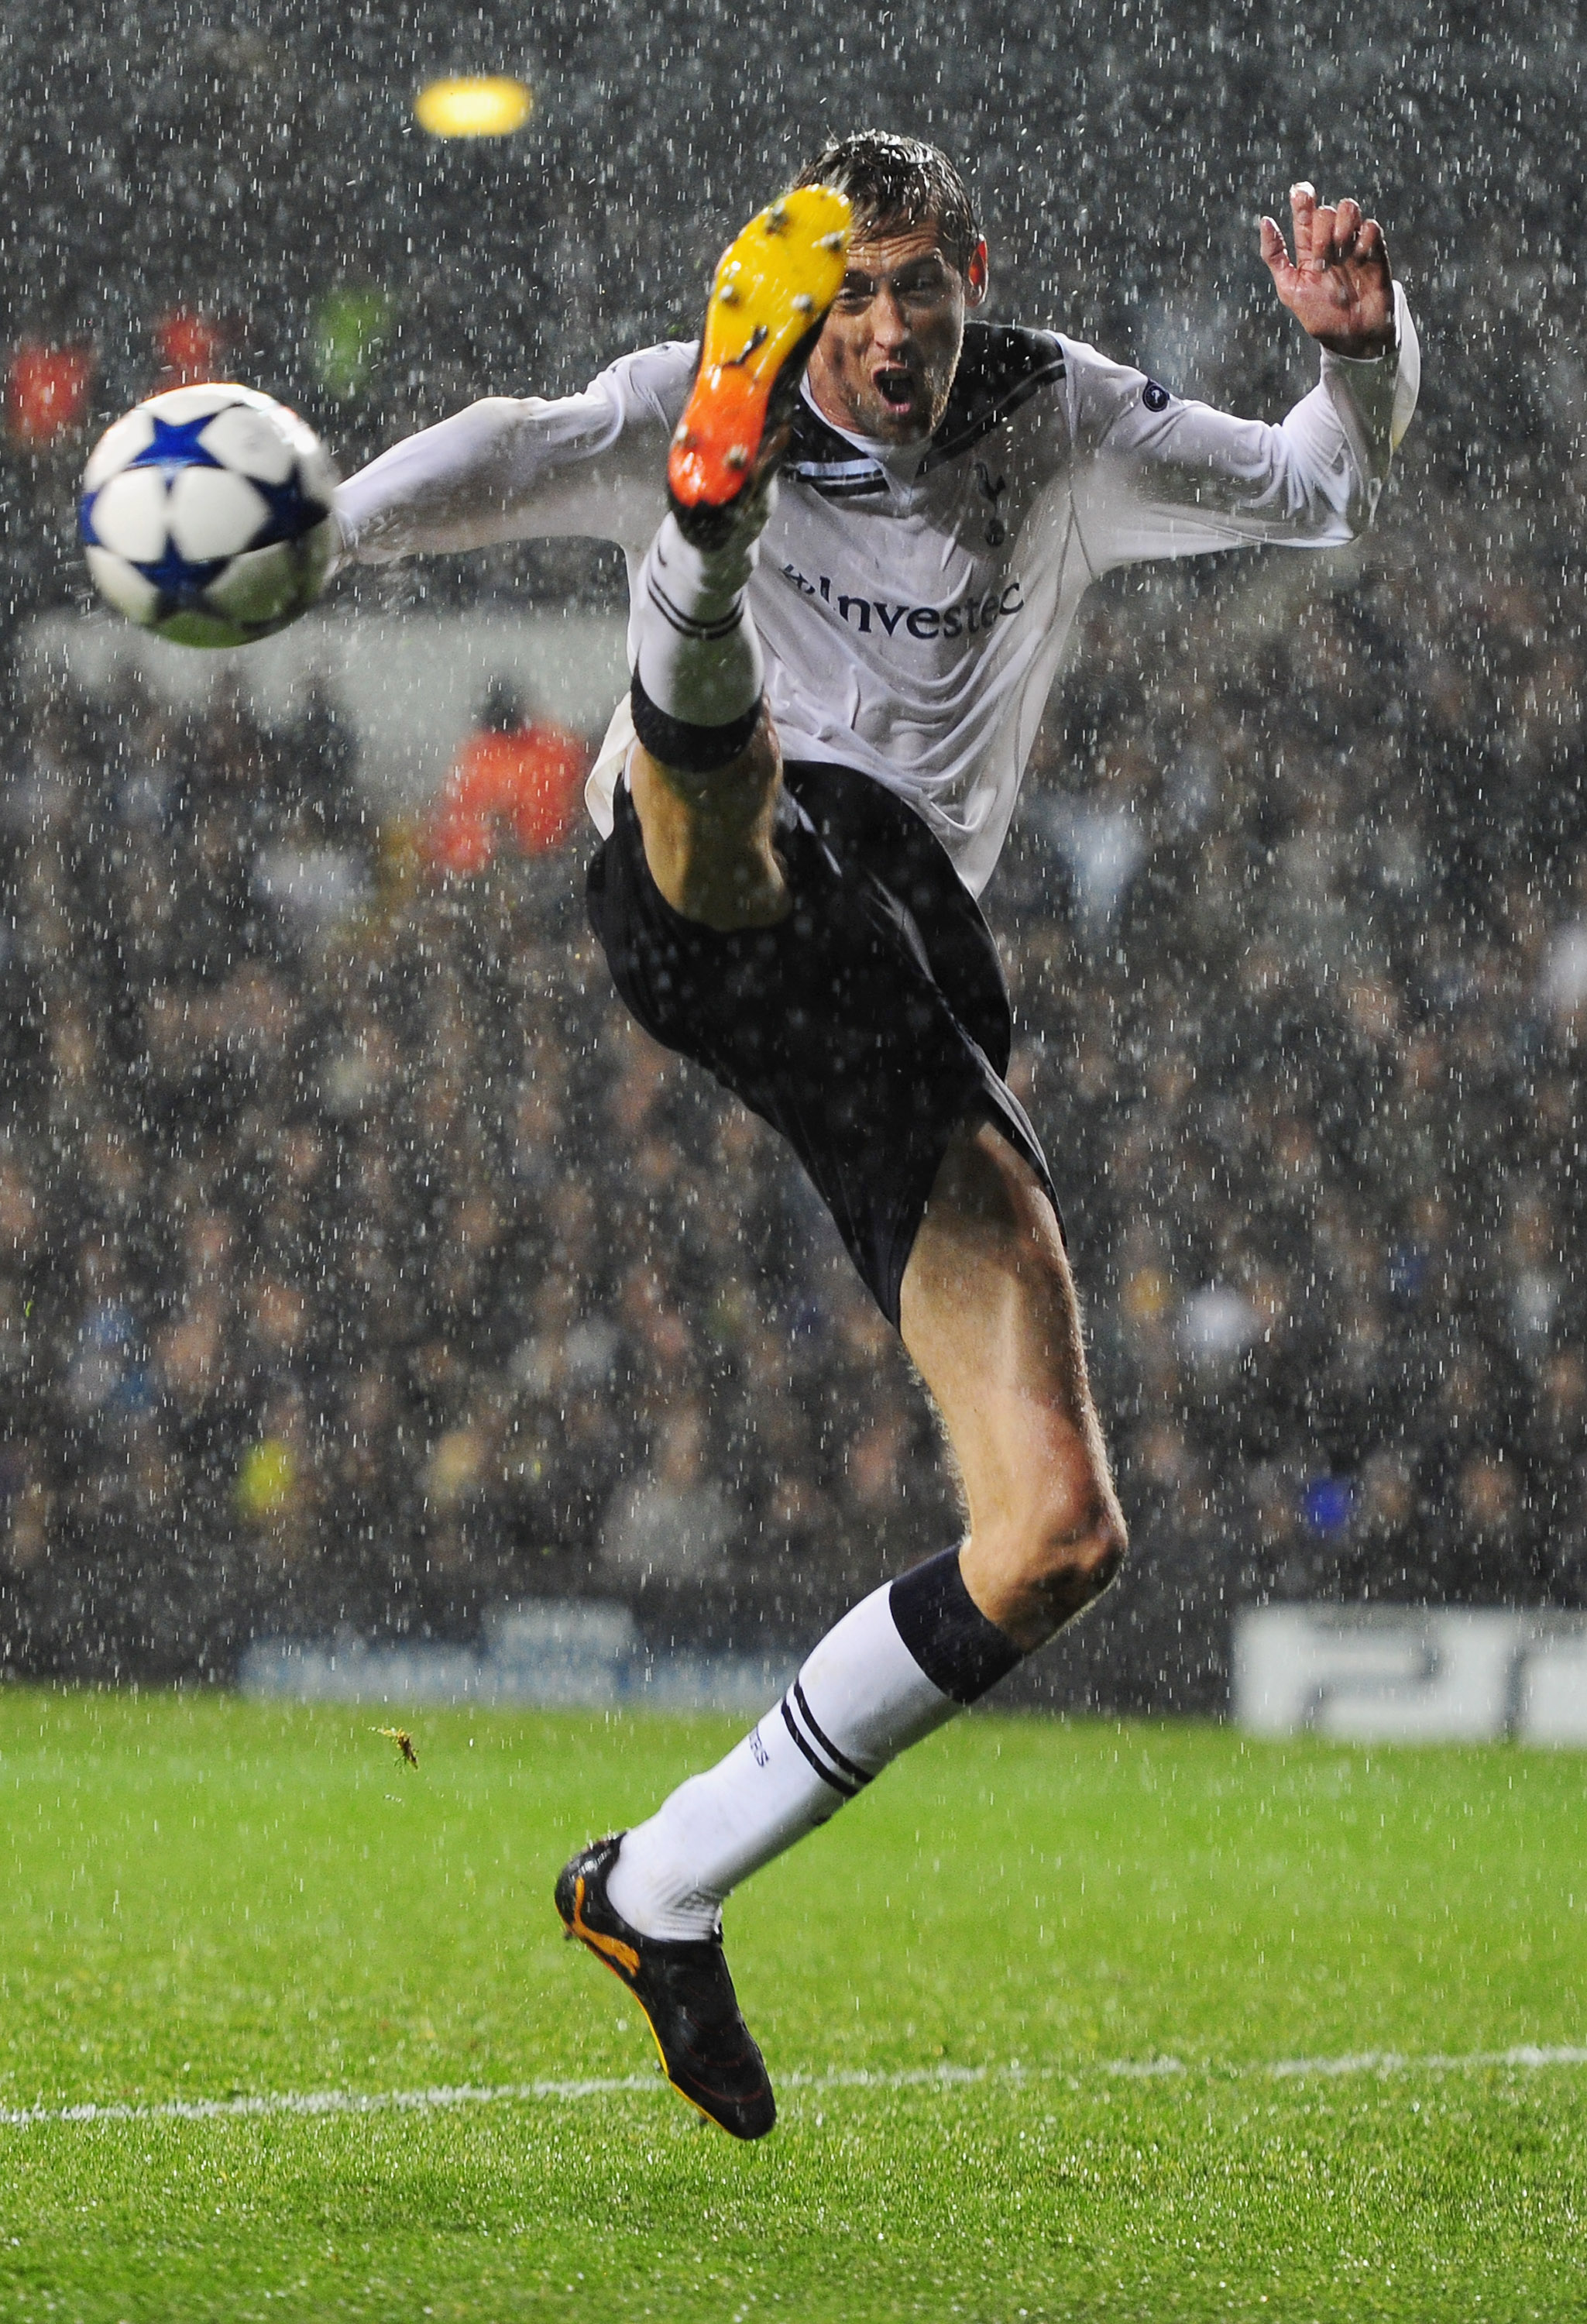 LONDON, ENGLAND - SEPTEMBER 29:  Peter Crouch of Tottenham attempts to control the ball in the rain during the  UEFA Champions League Group A match between Tottenham Hotspur and FC Twente at White Hart Lane on September 29, 2010 in London, England.  (Phot